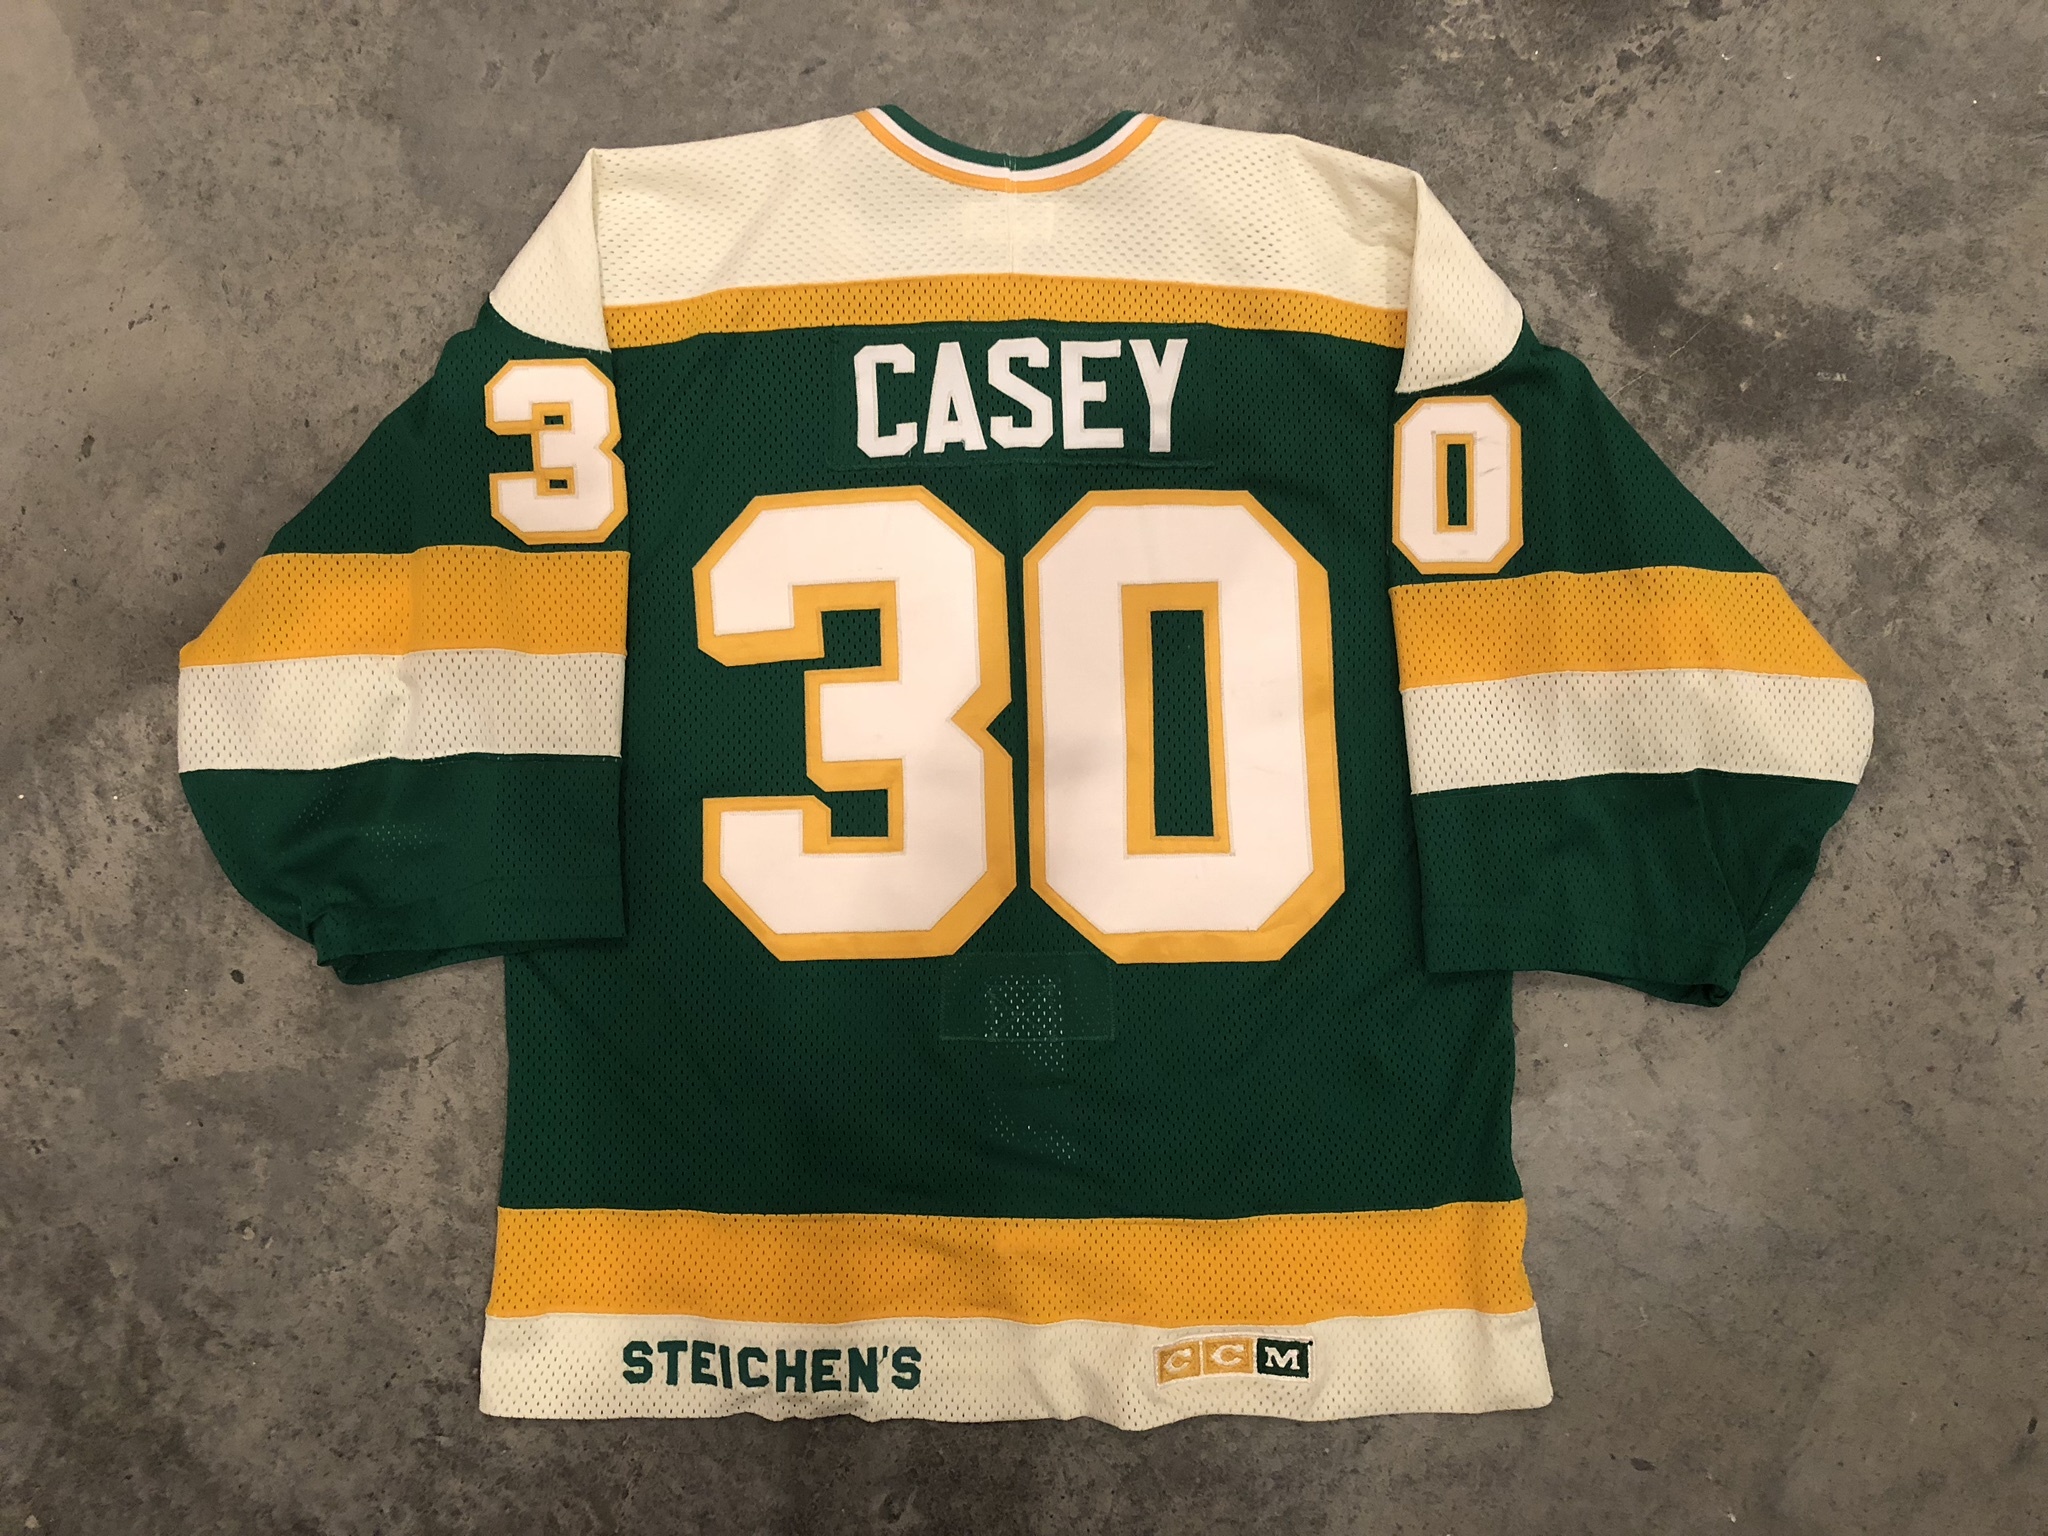 Men's Minnesota North Stars #30 Jon Casey 1988-89 Green CCM Vintage  Throwback Jersey on sale,for Cheap,wholesale from China